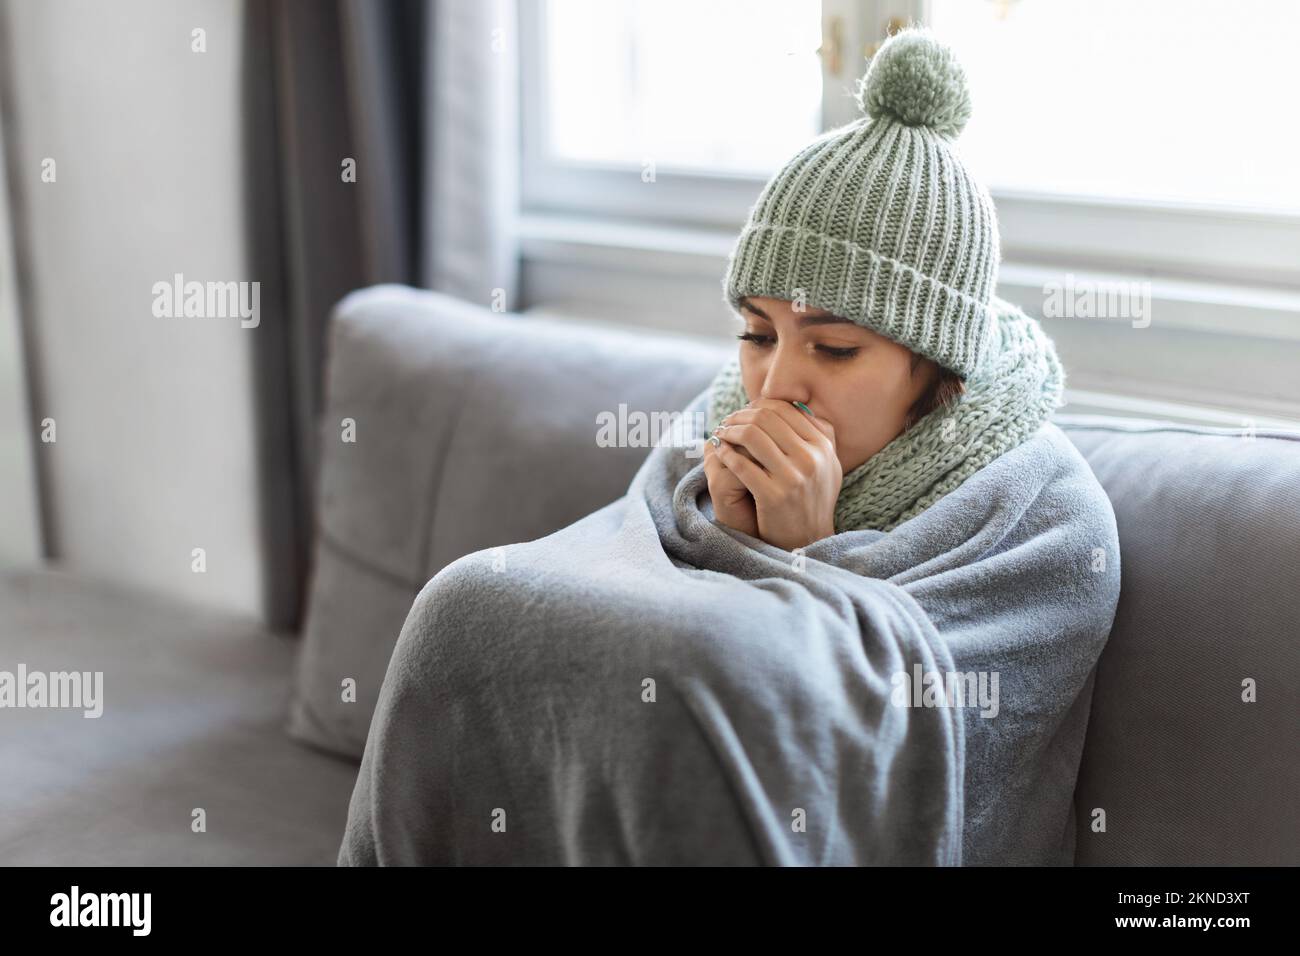 Young Woman Feeling Cold At Home, Sitting On Couch Covered In Blanket ...